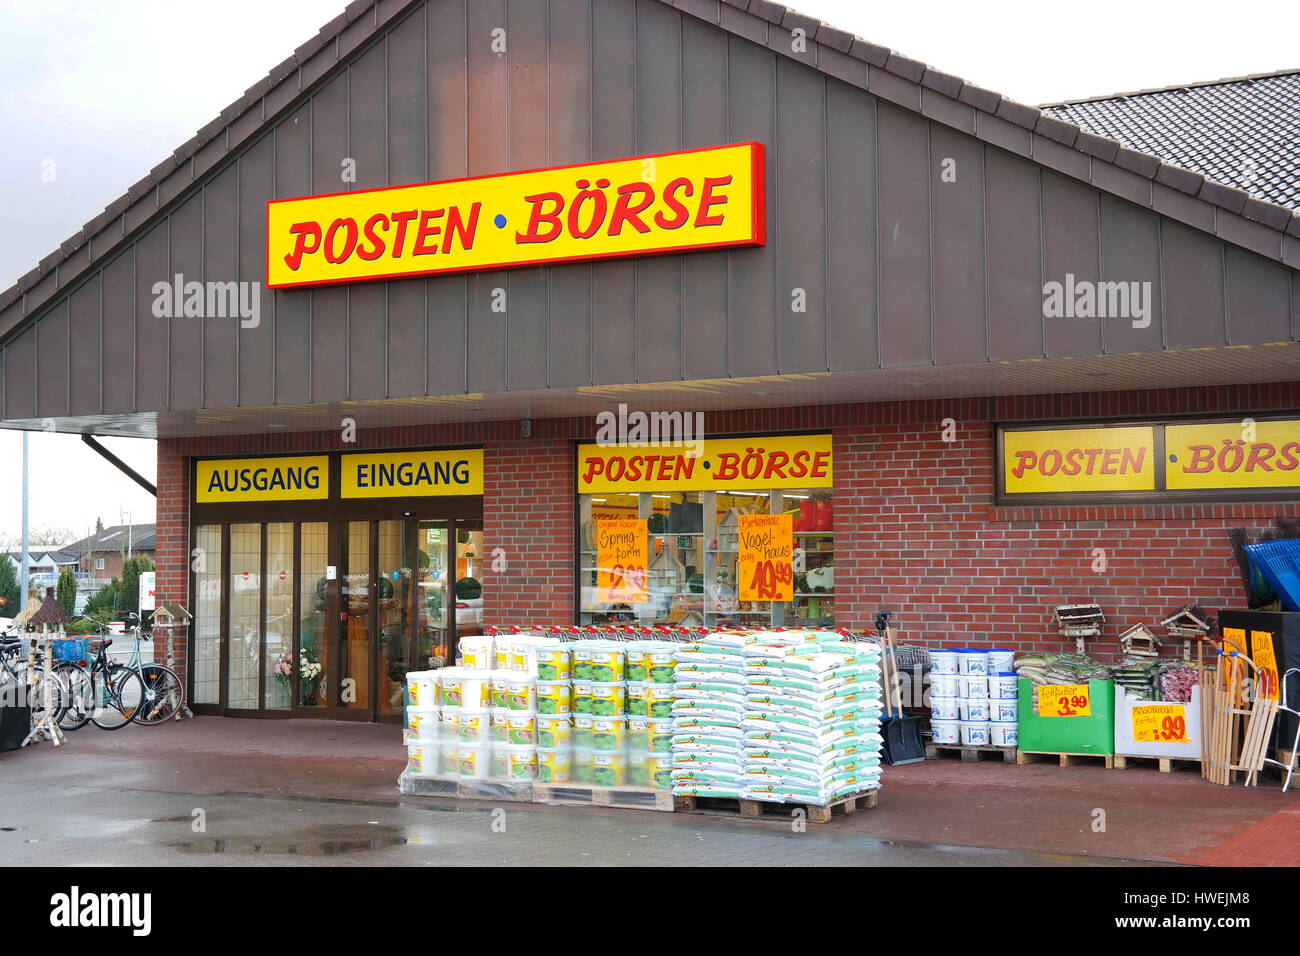 Posten Borse outlet superstore Stock Photo